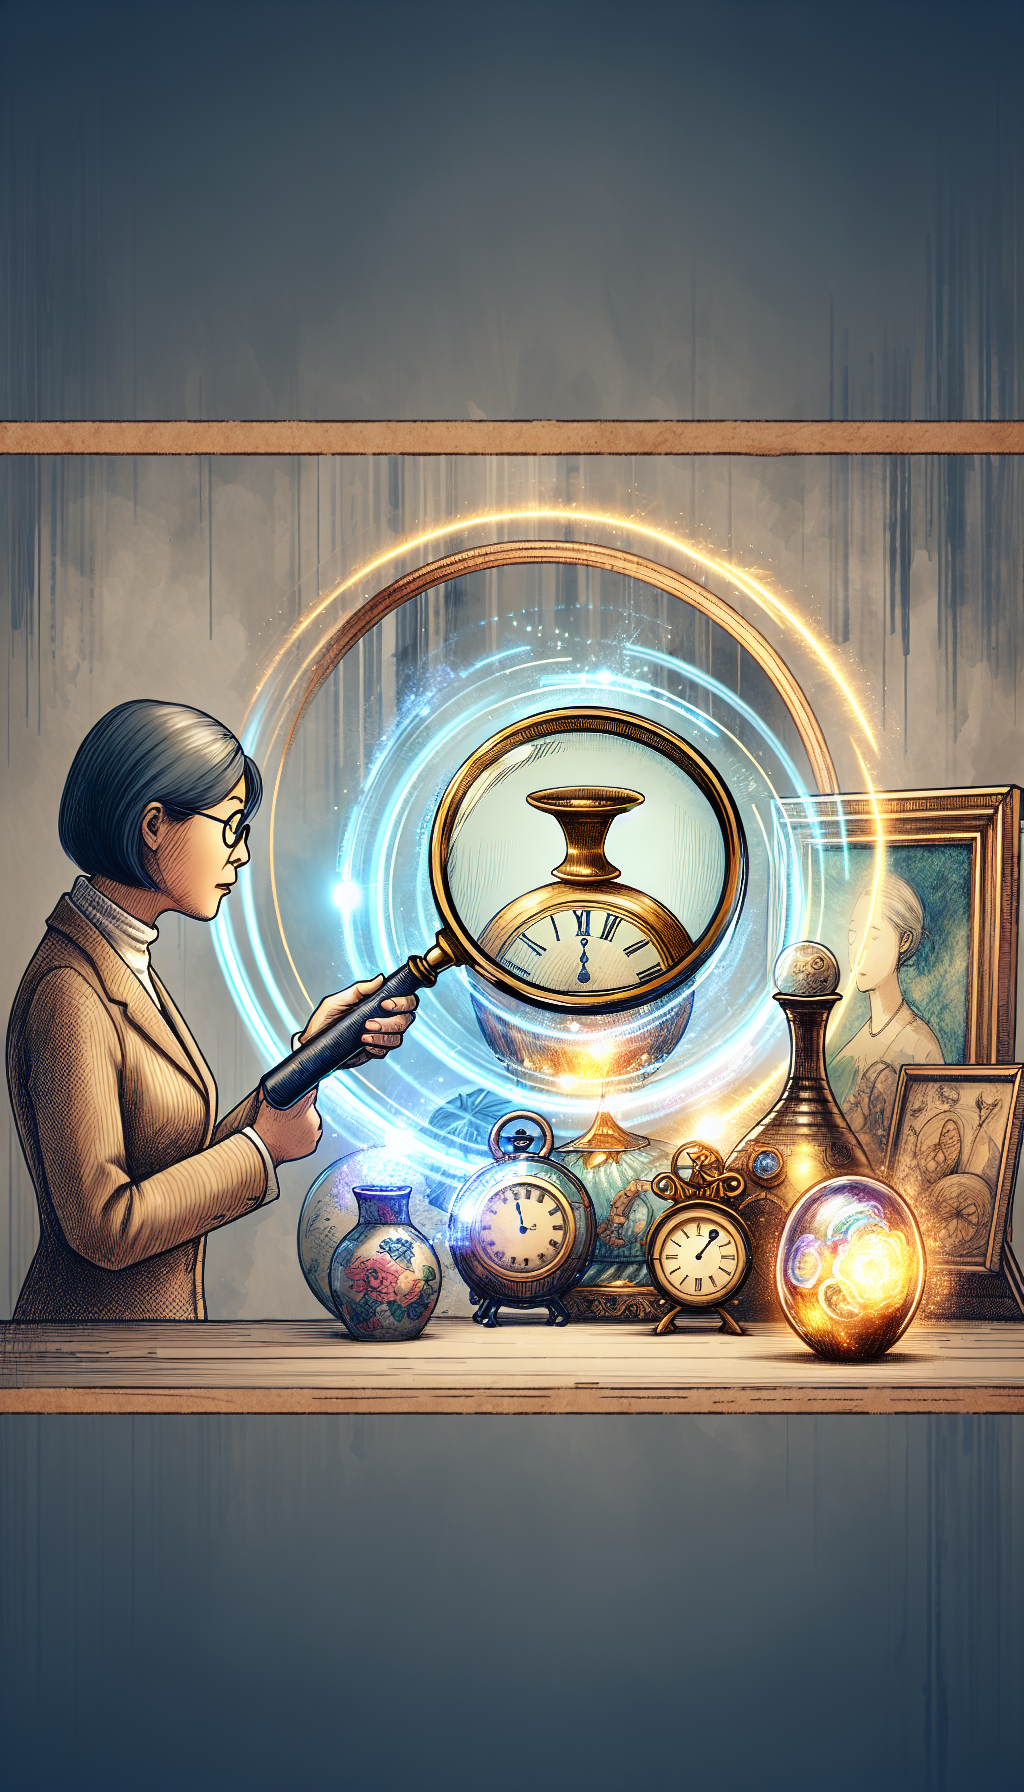 In the illustration, an antique magnifying glass hovers above a cluster of vintage objects—a clock, vase, and a painting—each glowing with a different intensity. The magnifying glass reveals the true value of each item with visible aura-like rings, while an appraiser with an expert eye nods approvingly in the background. The styles vary from sketchy lines for the objects to a watercolor backdrop.